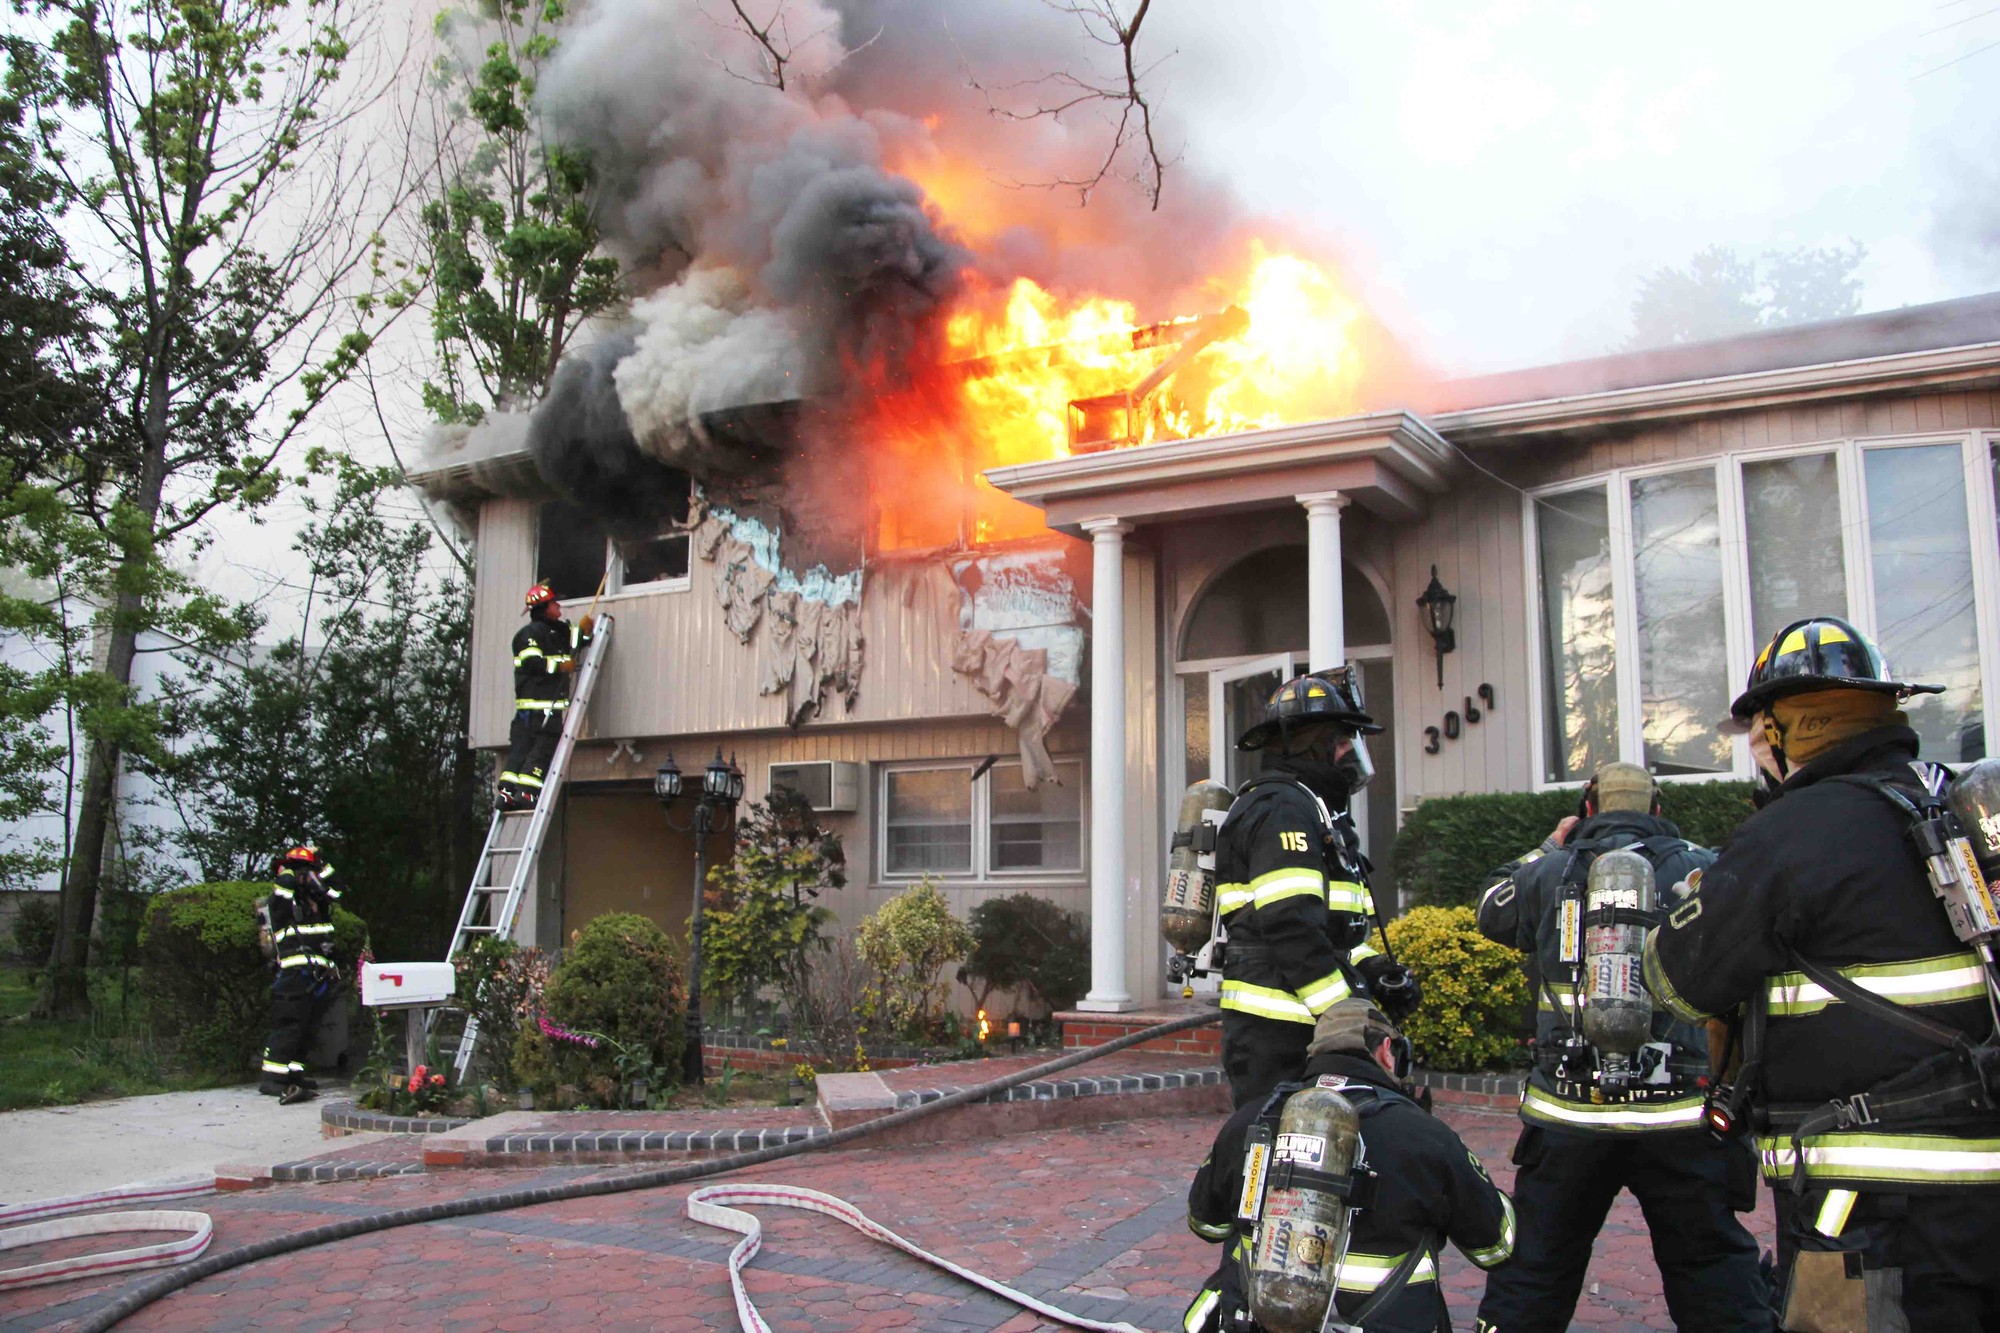 A home on Ann Street caught fire on May 25 around 8 p.m.